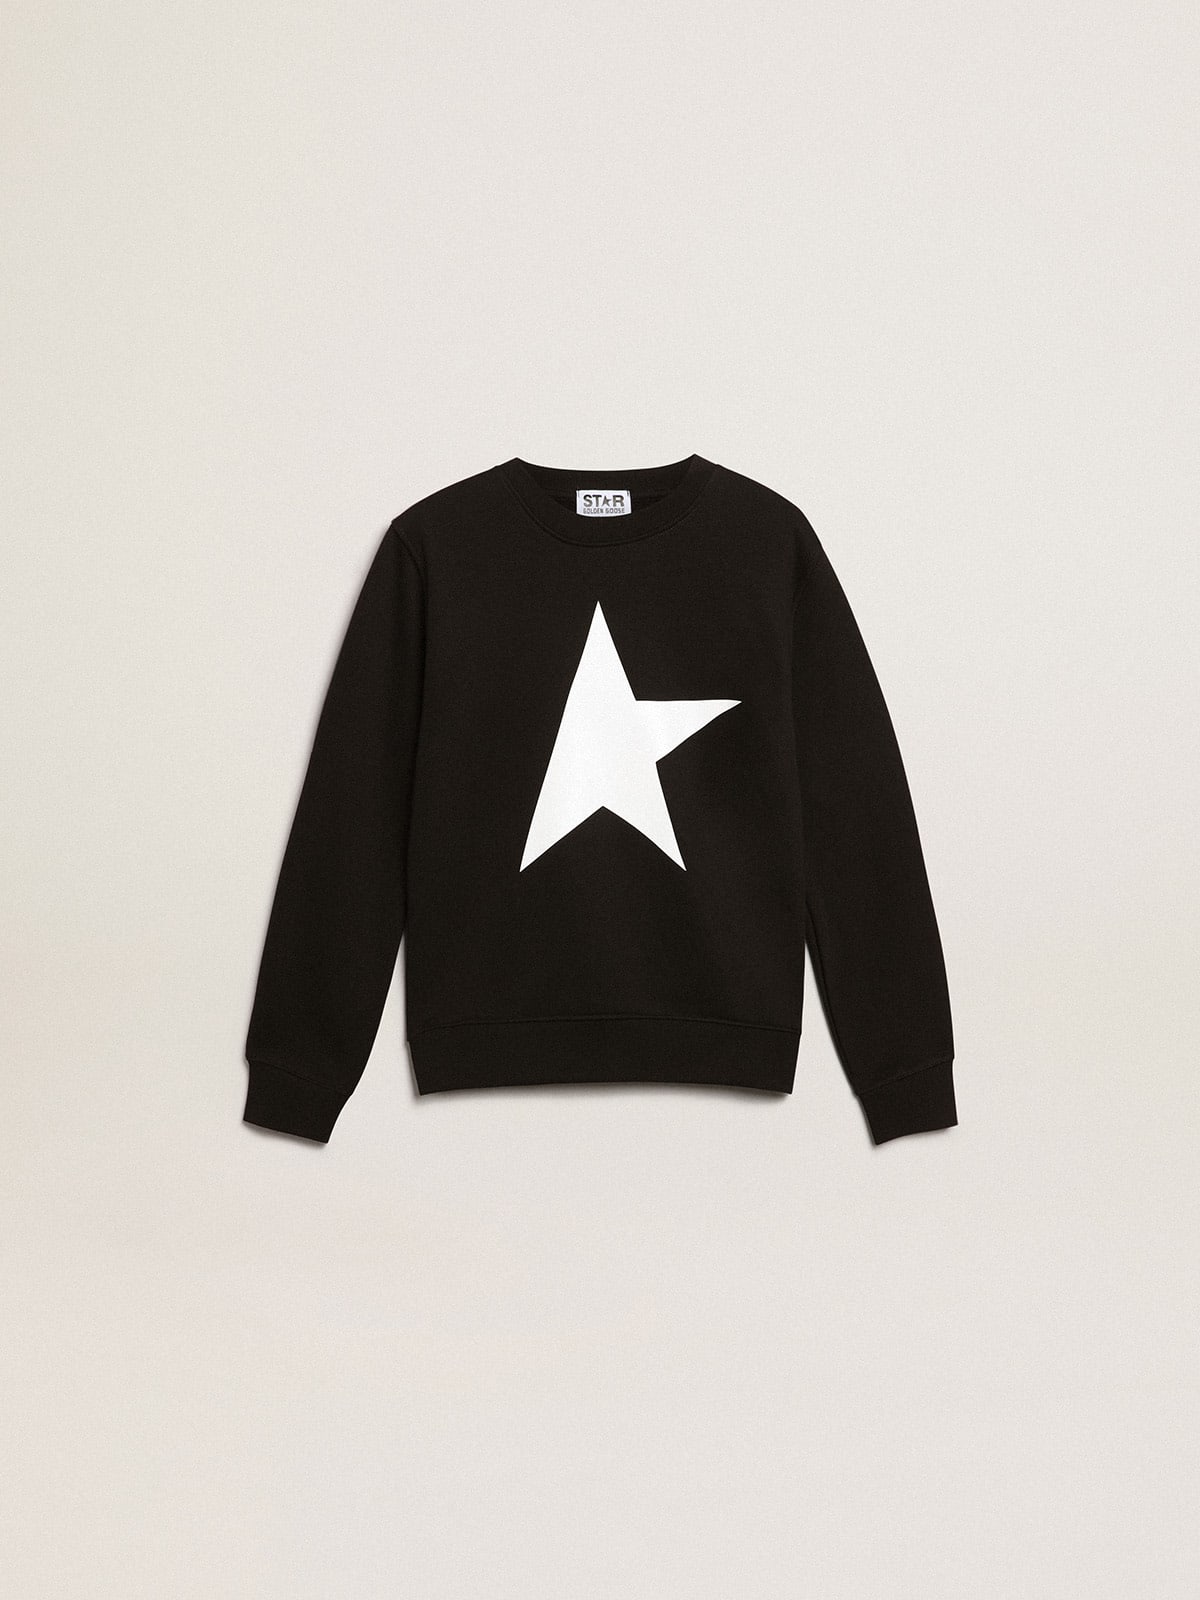 Black Star Collection sweatshirt with white maxi star on the front